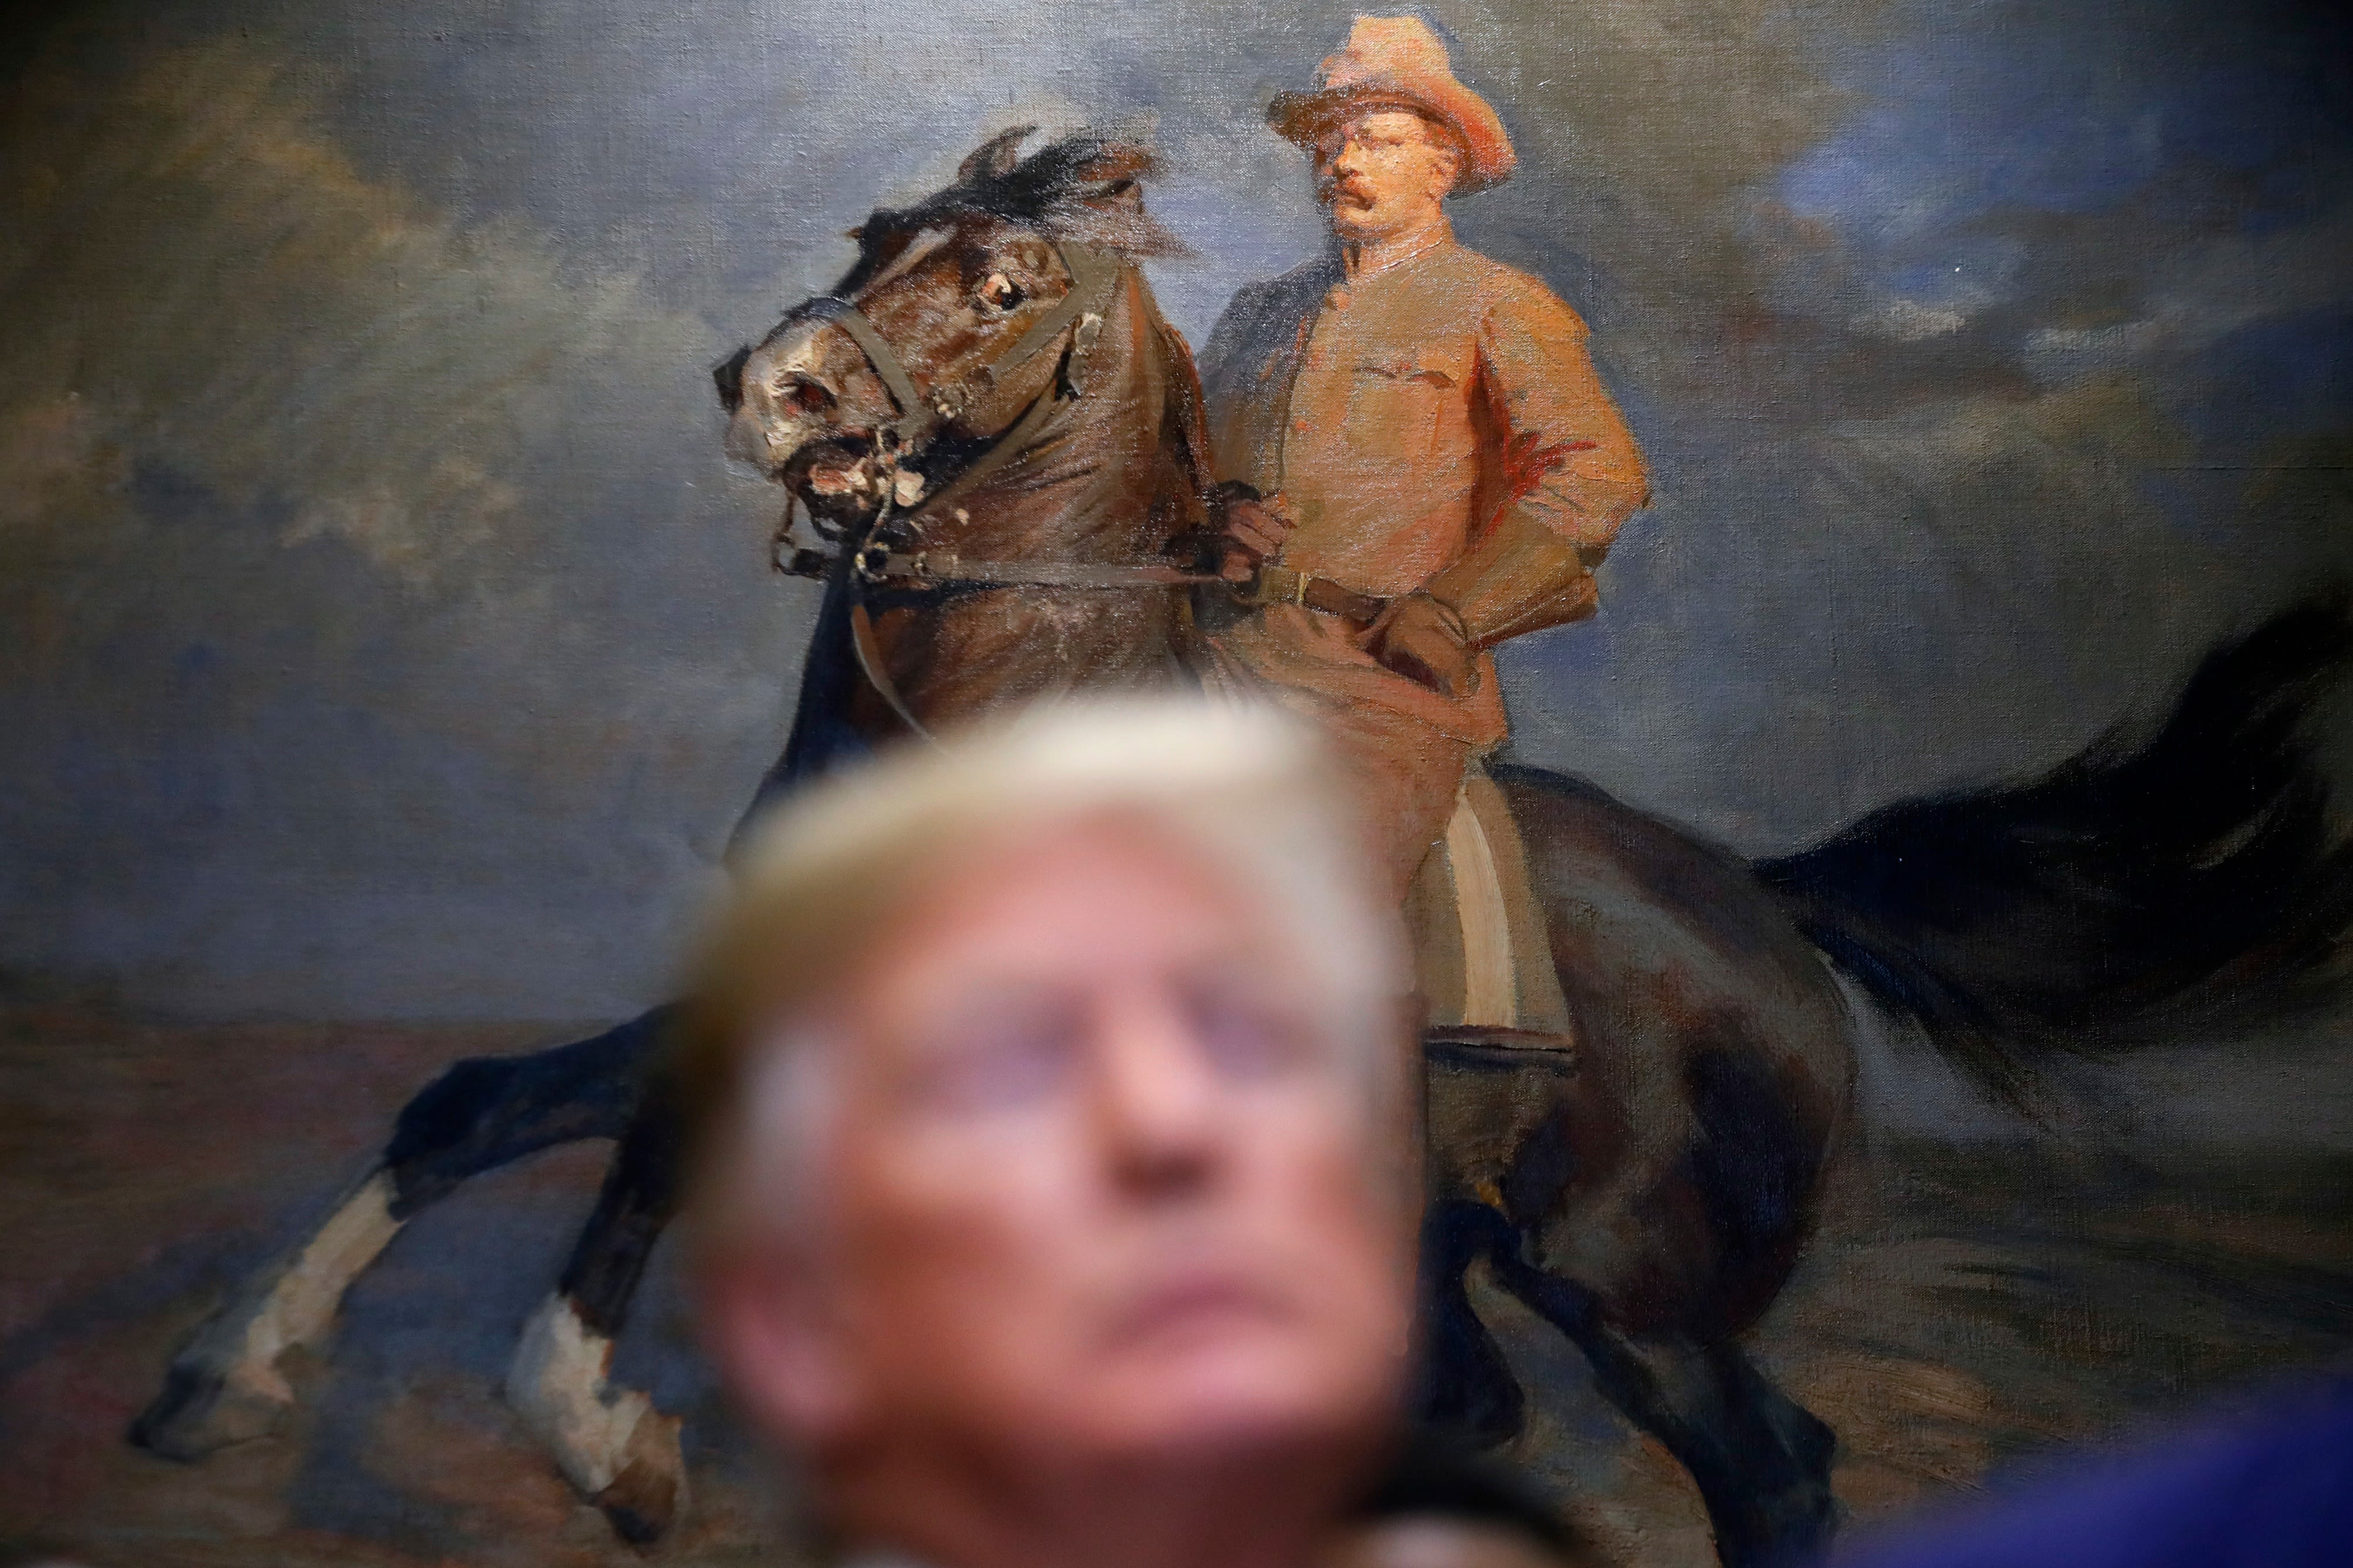 ‘Manly’ Teddy Roosevelt survived a gunshot. Trump backers seek to tap his image.